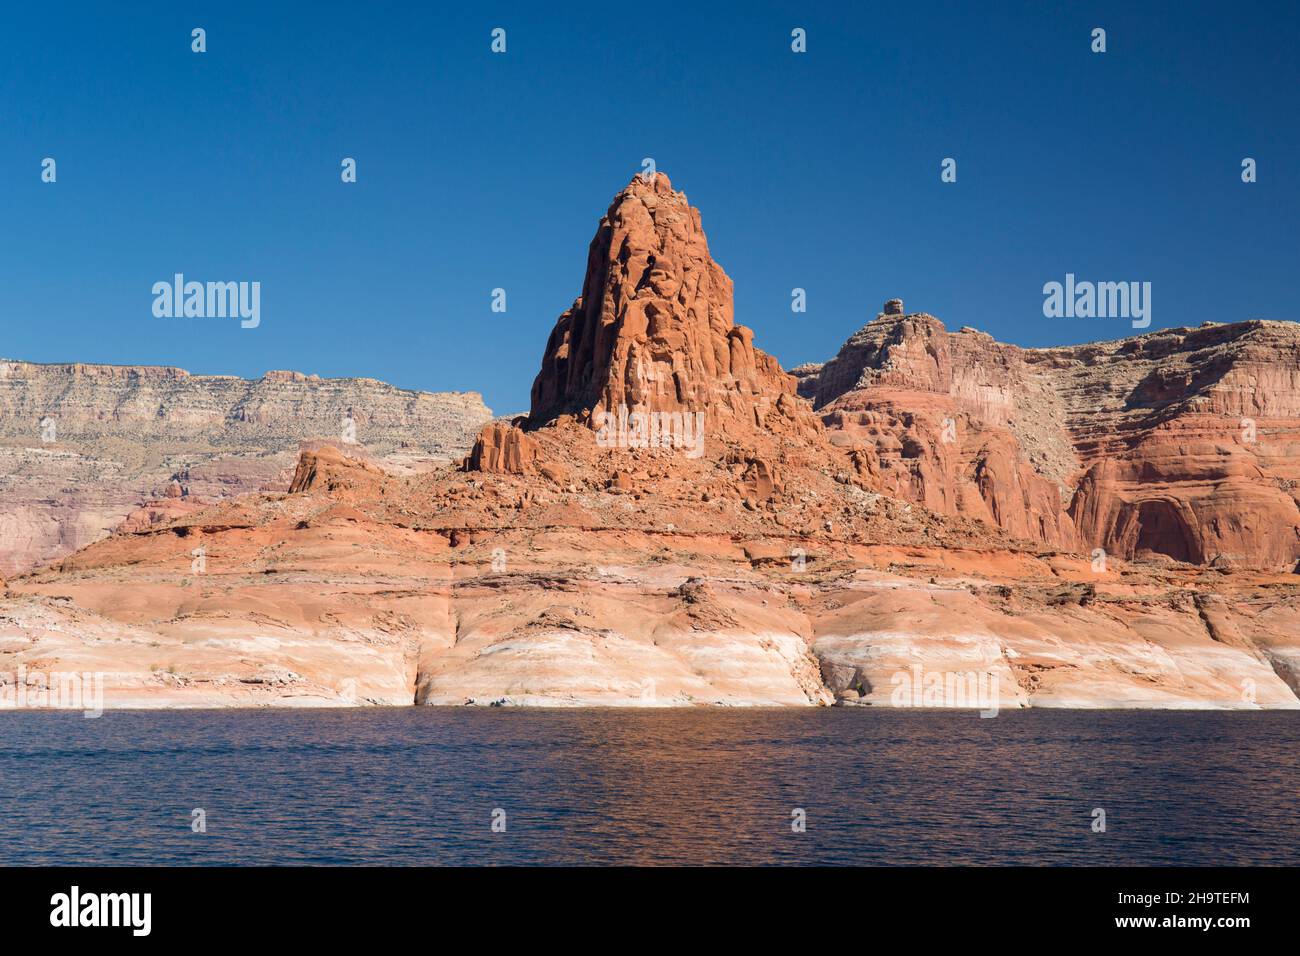 Glen Canyon National Recreation Area, Utah, USA. Majestic red sandstone butte towering above Lake Powell. Stock Photo